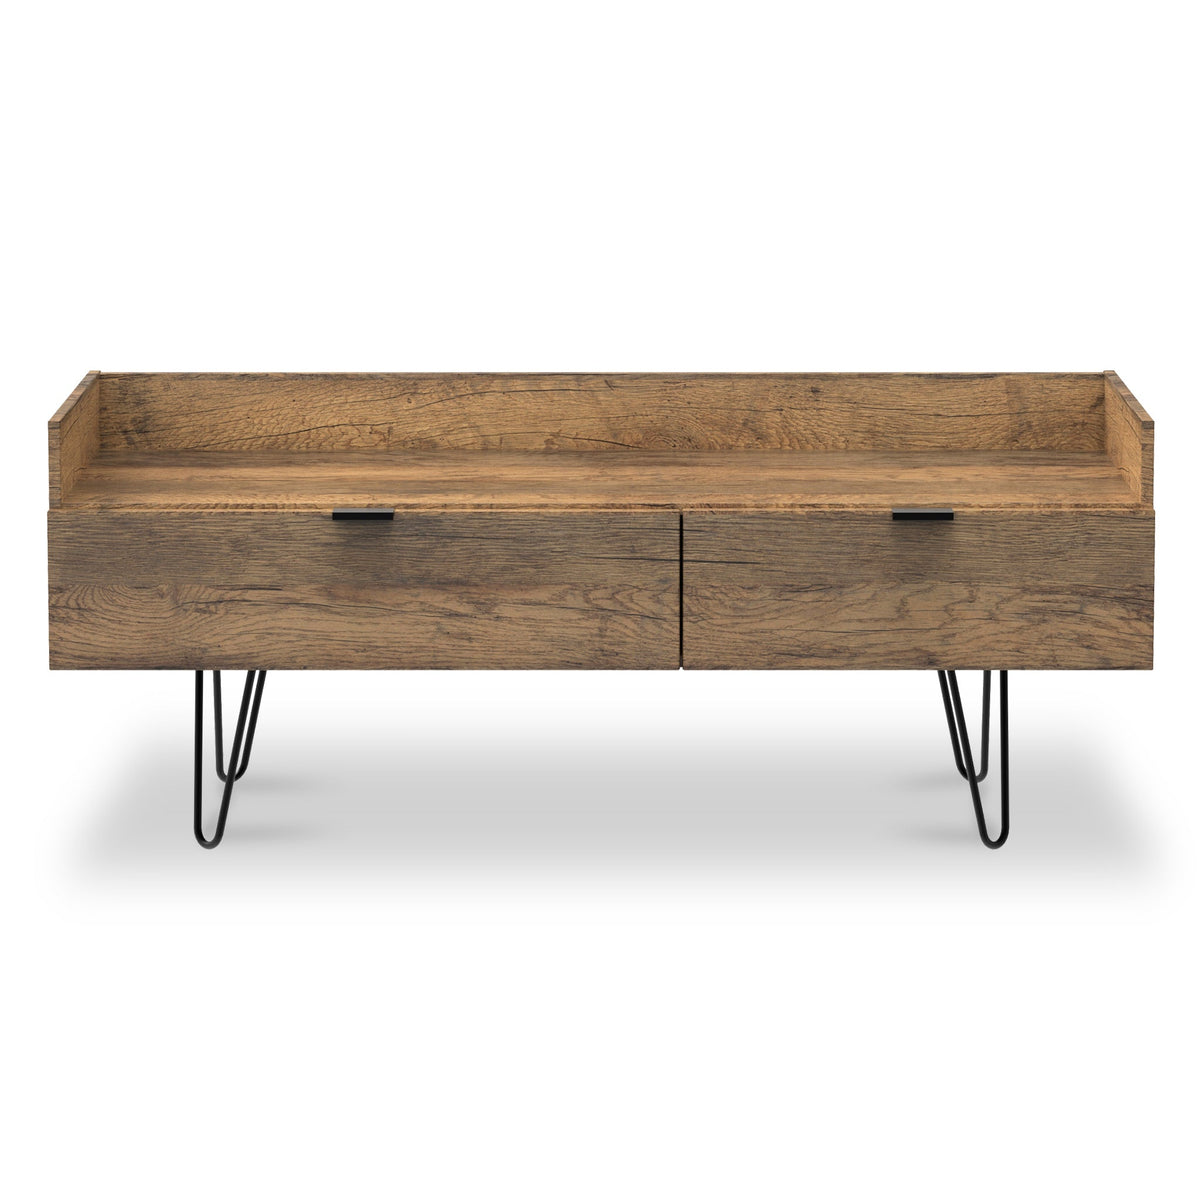 Moreno Rustic Oak Media Console Unit with Black Hairpin Legs from Roseland furniture